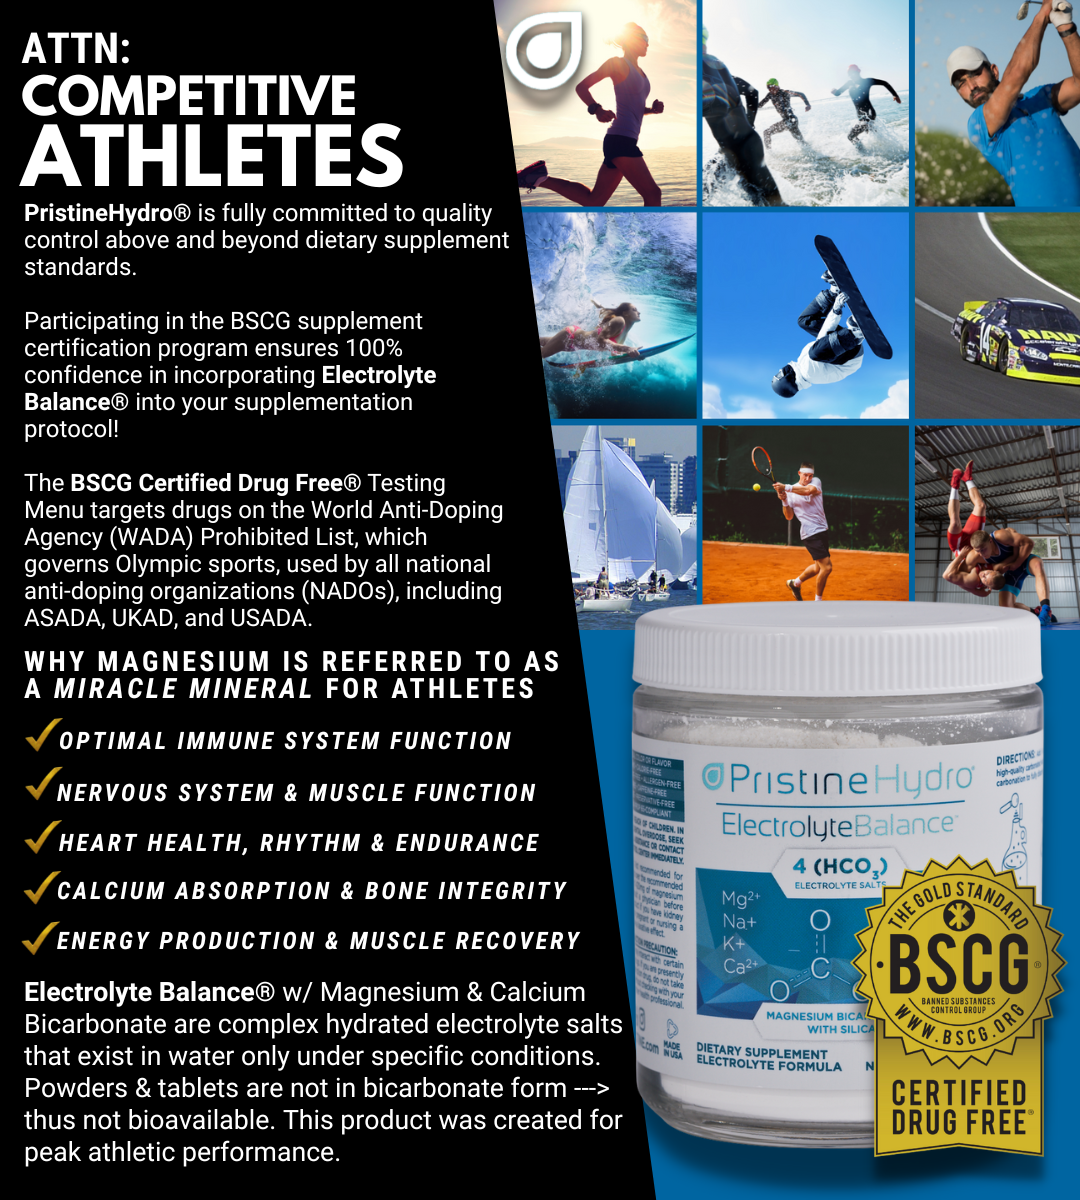 Electrolyte Balance - Why Magnesium is considered by many to be the Miracle Mineral for Competitive Athletes - Drink ElectrolyteBalance for Peak Athletic Performance - The Most Bioavailable Form of Magnesium Today!